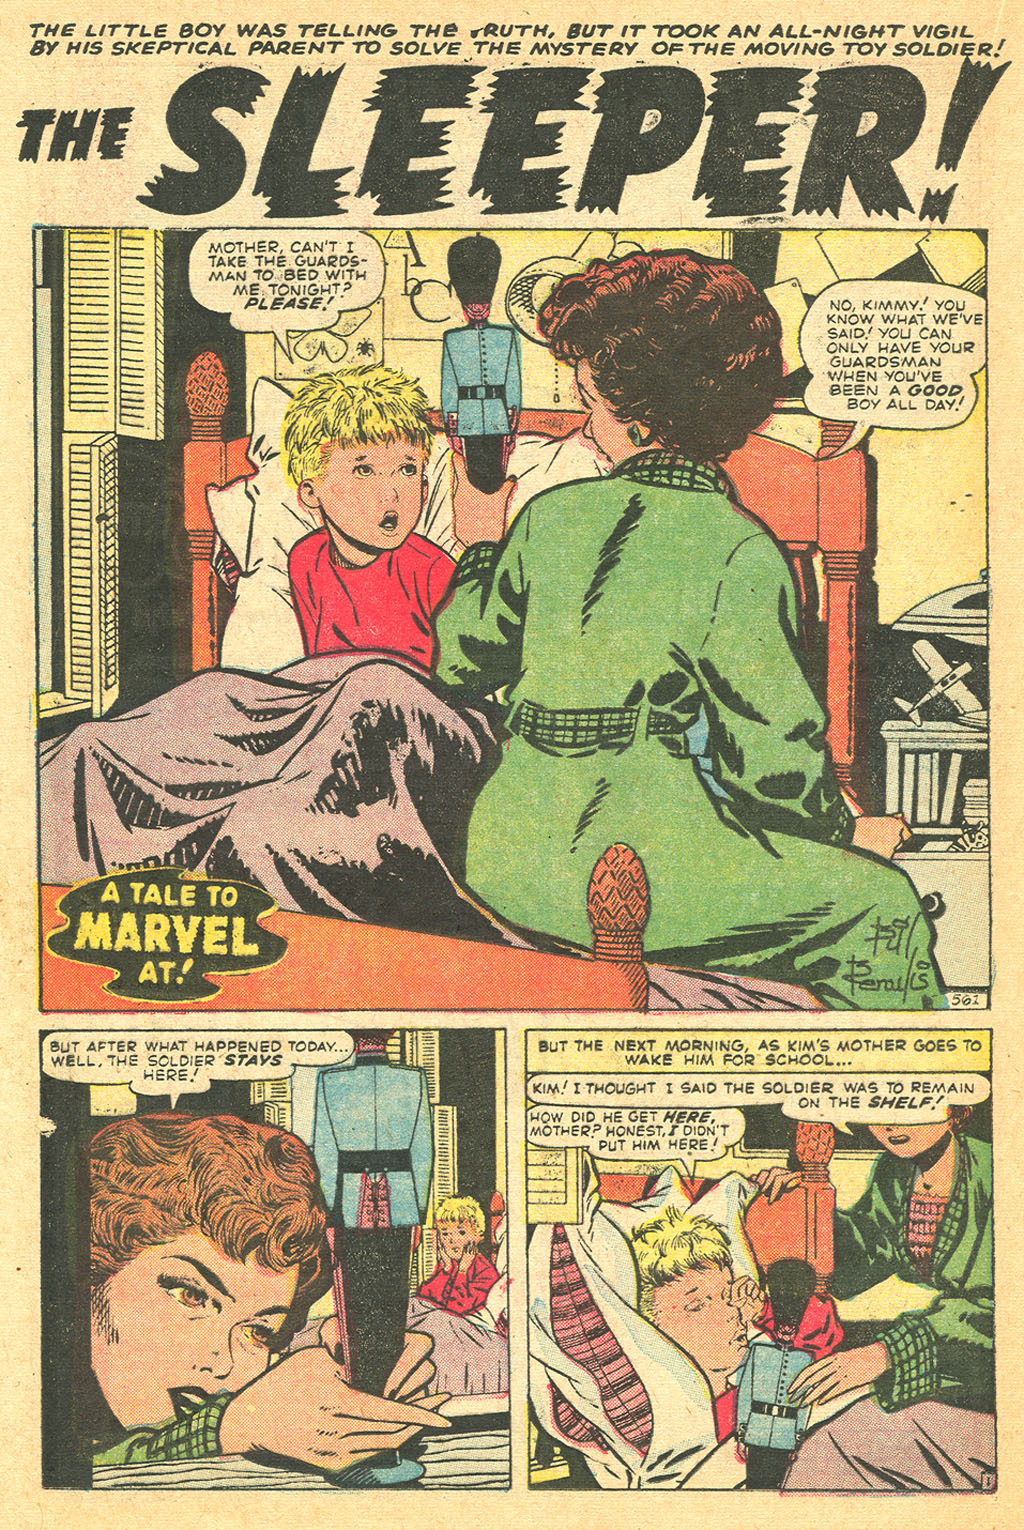 Marvel Tales (1949) 139 Page 15